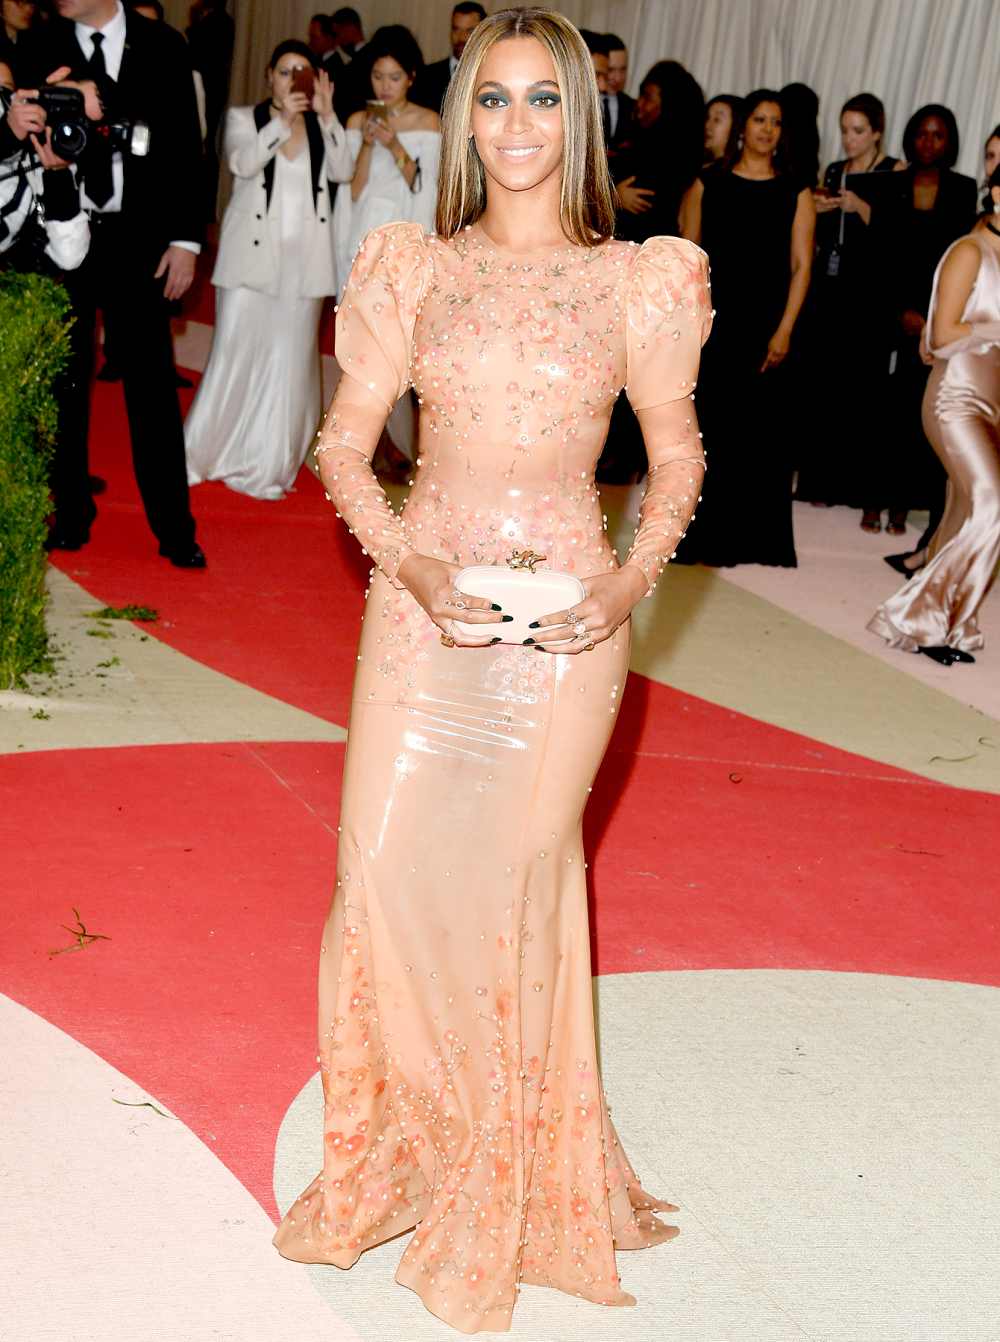 Beyonce Knowles attends the 'Manus x Machina: Fashion in an Age of Technology' Costume Institute Gala at the Metropolitan Museum of Art on May 2, 2016 in New York City.